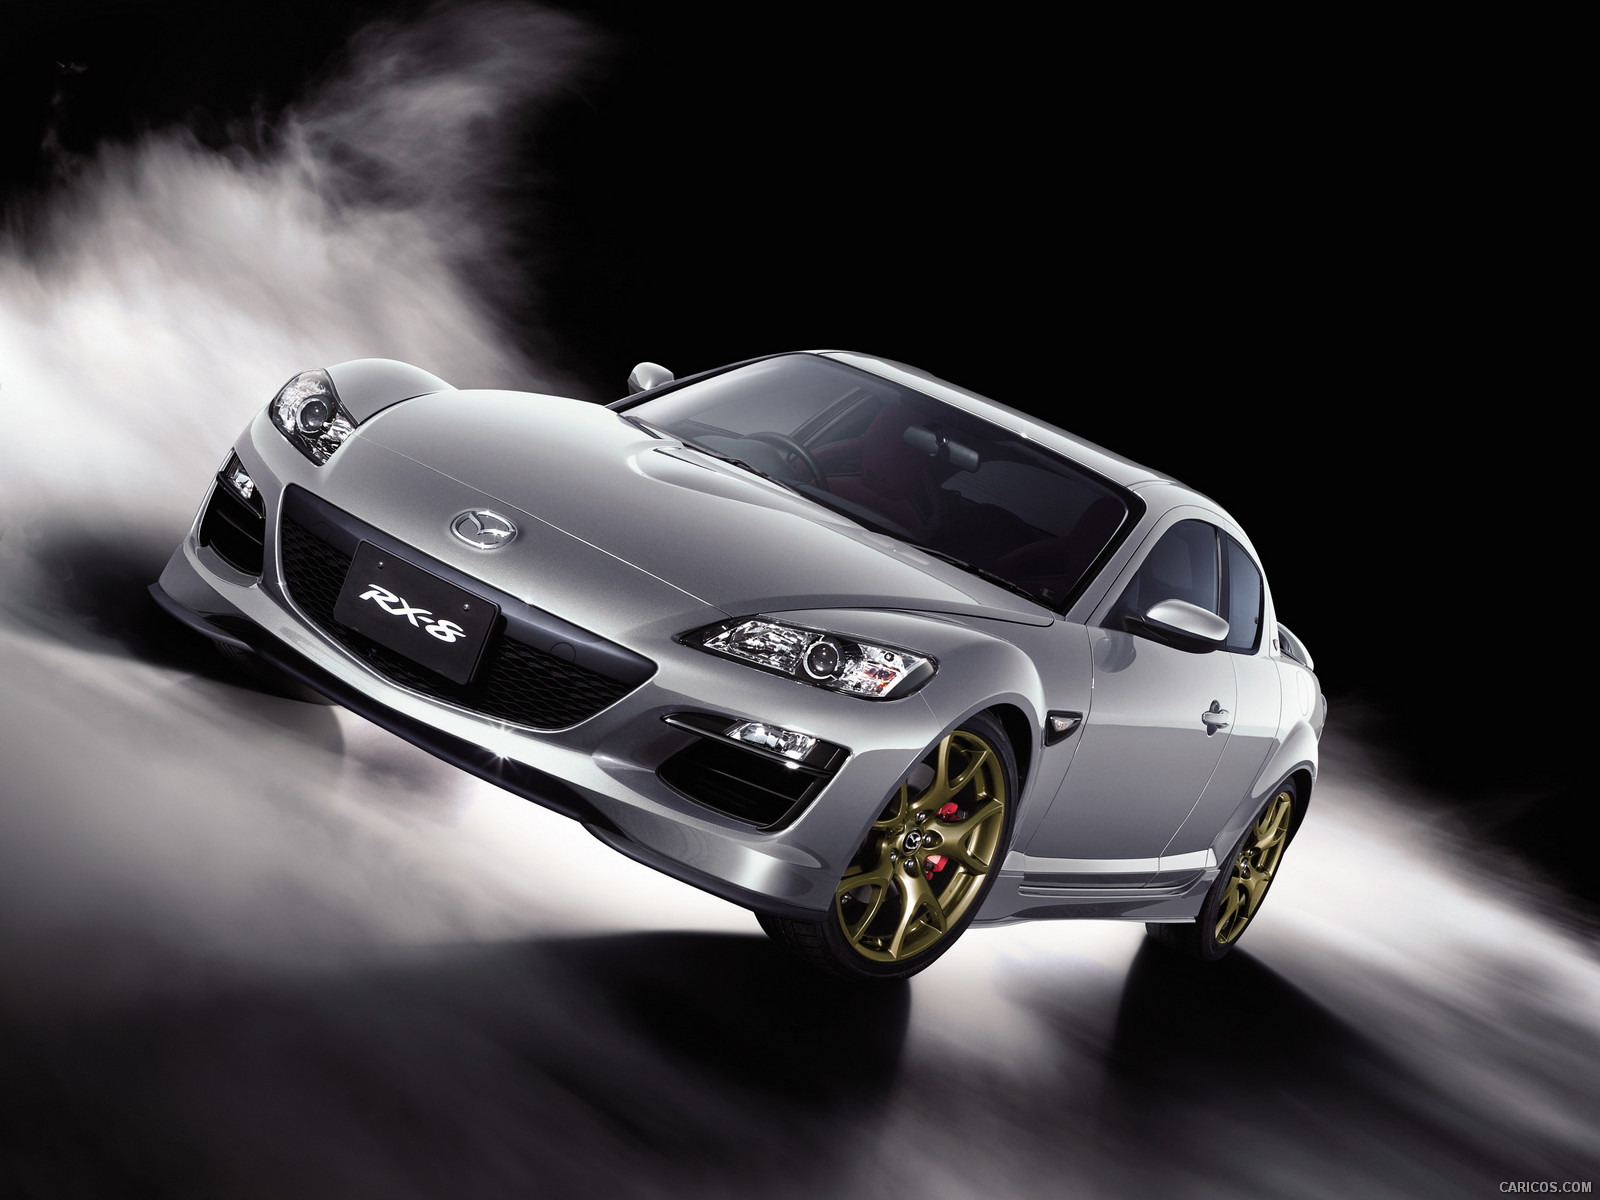 2012 Mazda RX-8 Sprint R  - Front, #2 of 3